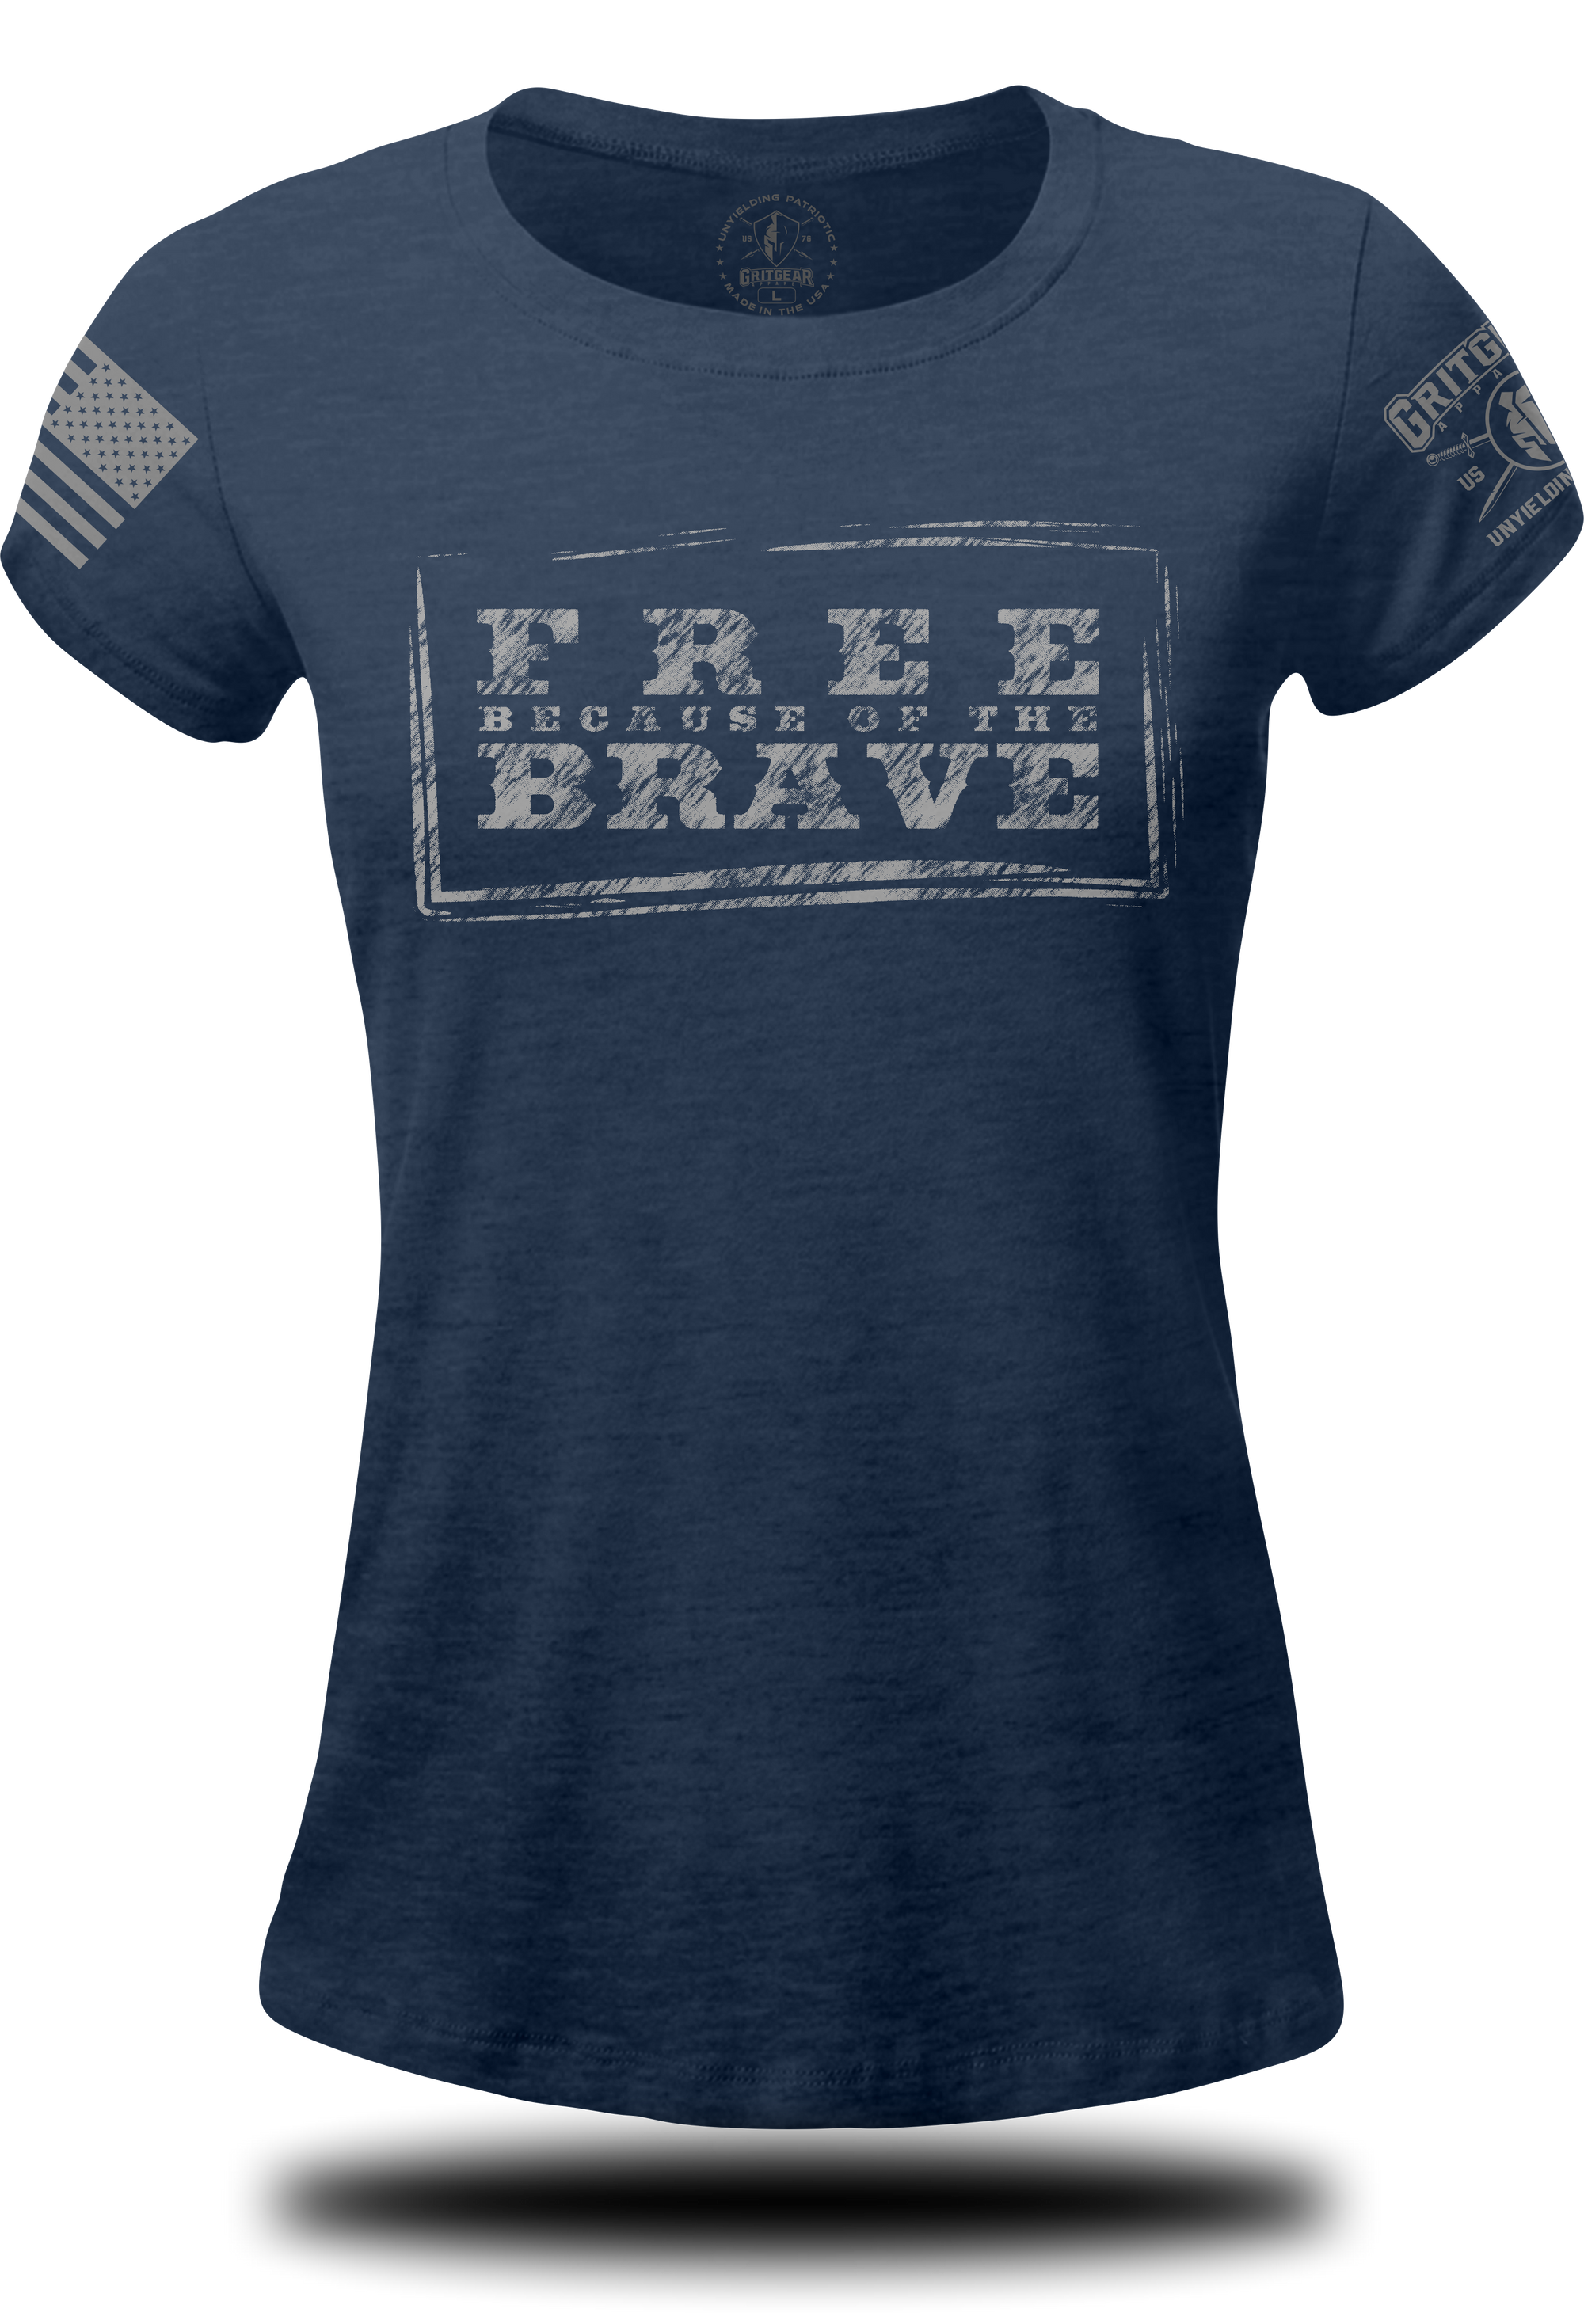 Free Because of the Brave - Ladies Tee | Grit Gear Apparel